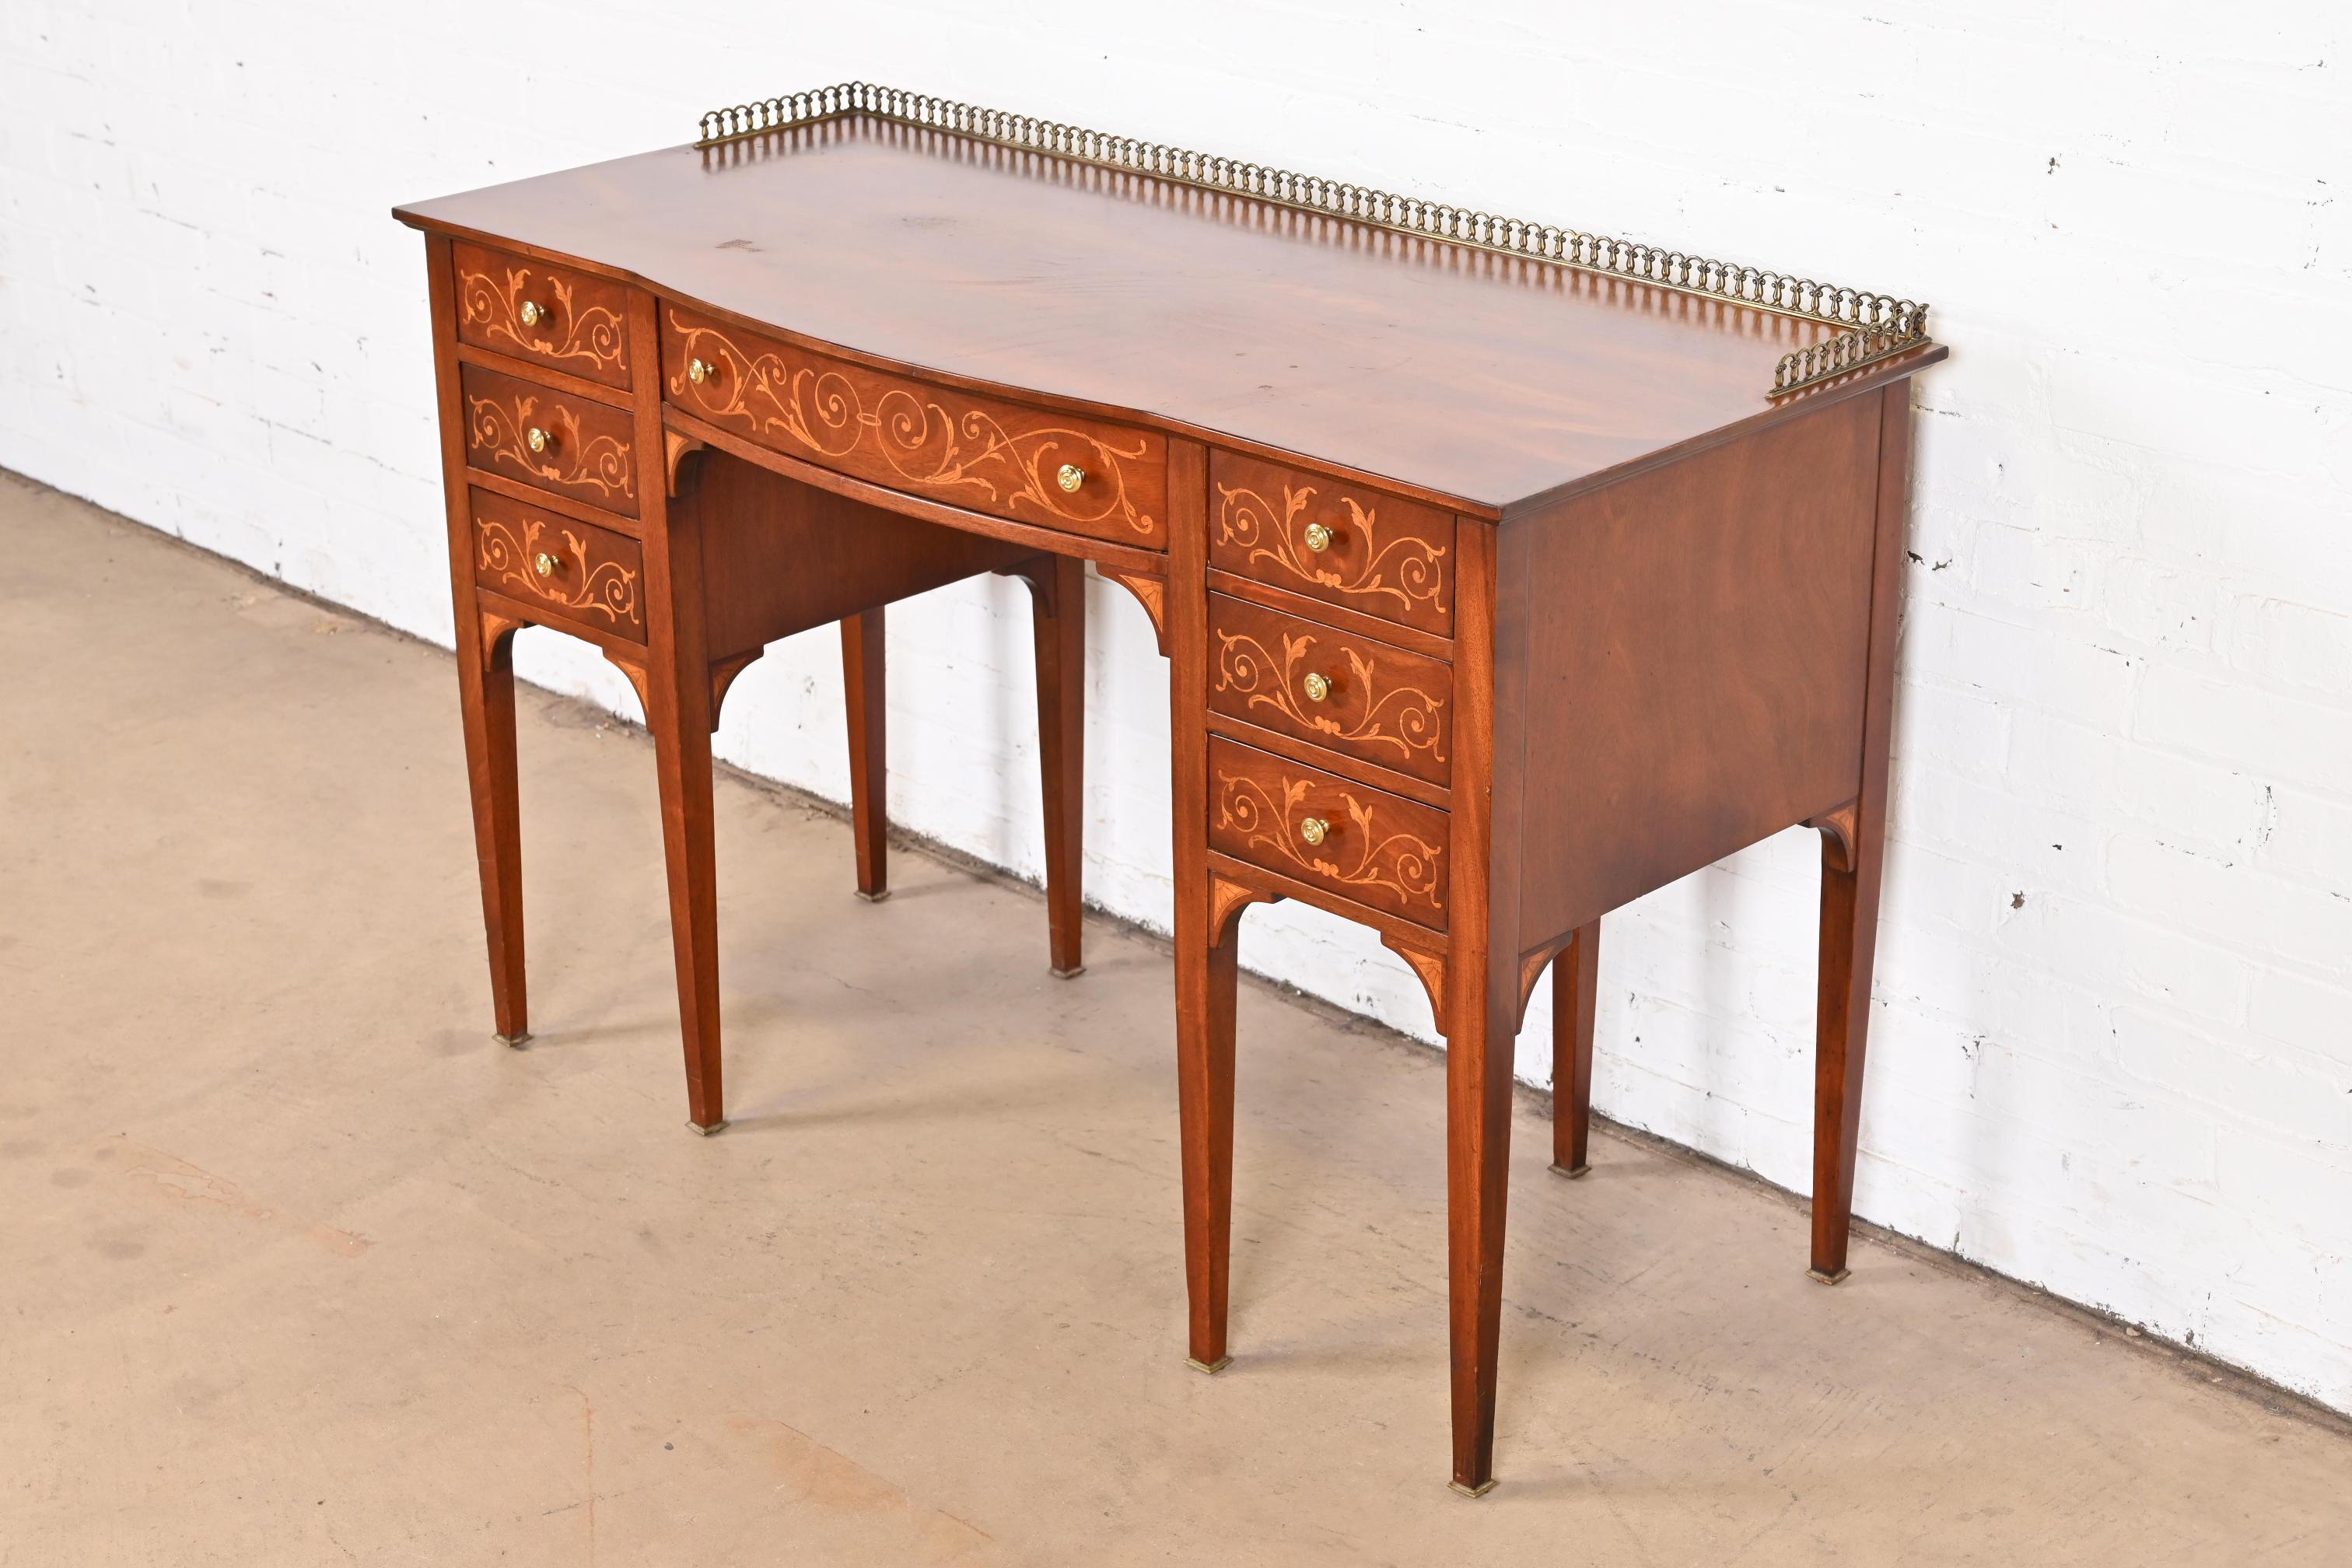 Mid-20th Century French Regency Louis XVI Mahogany Inlaid Marquetry Vanity by Johnson Furniture For Sale